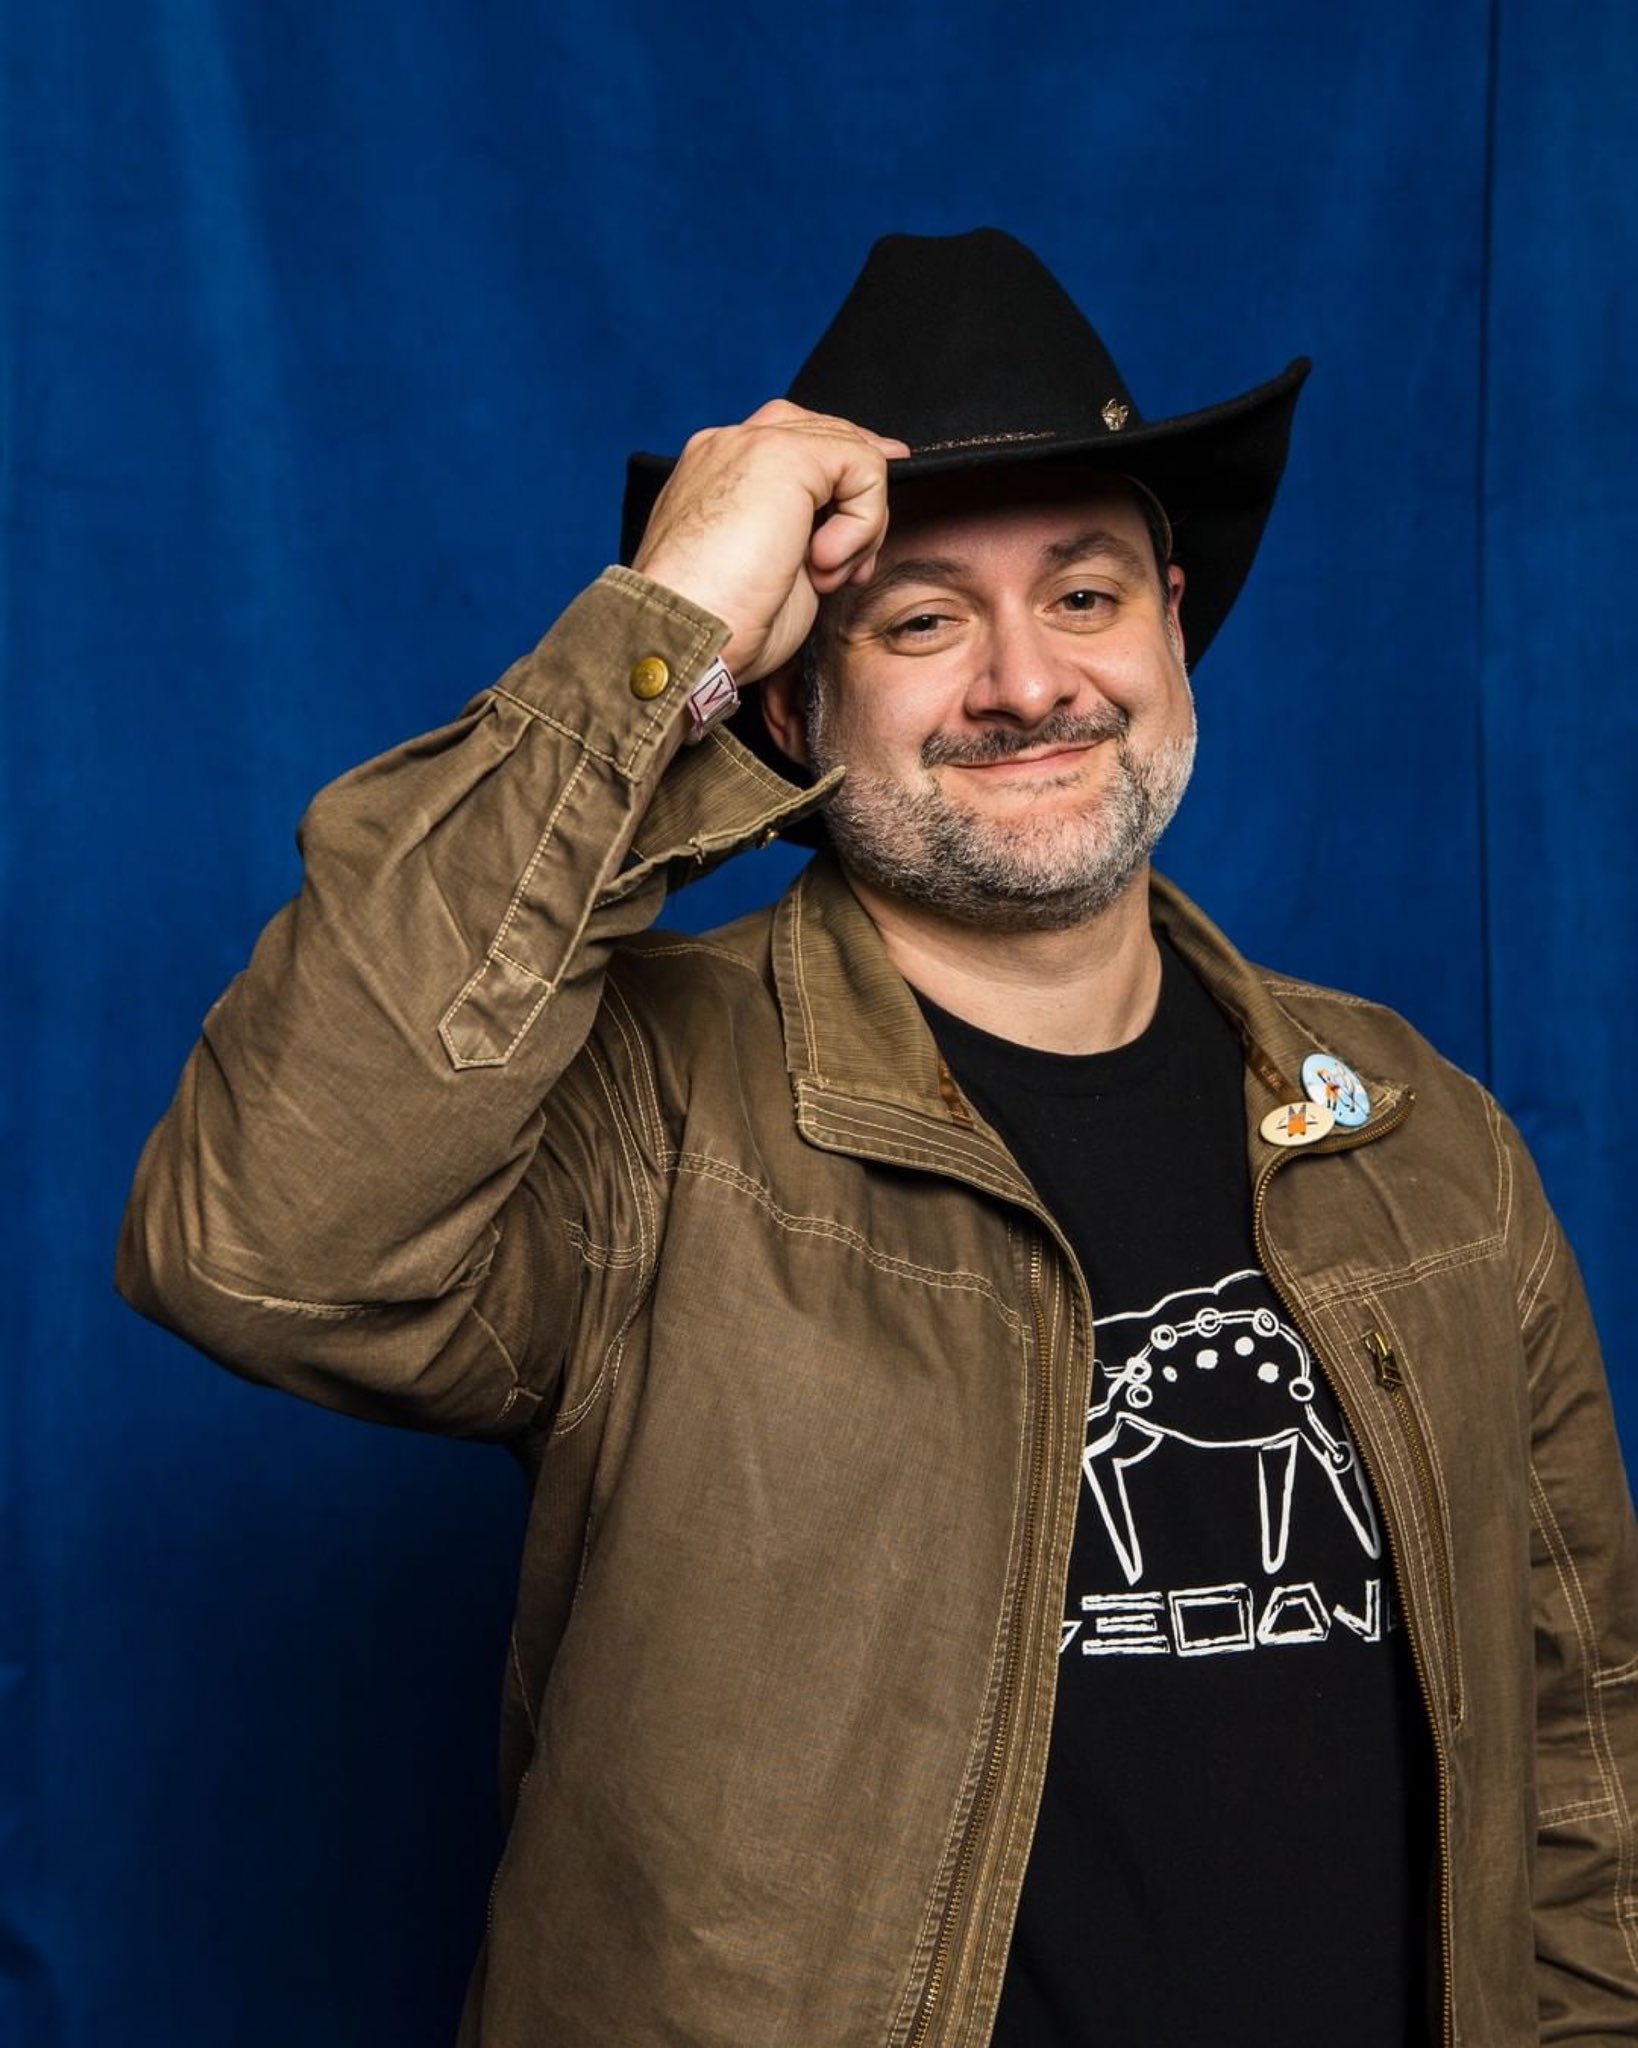      Put on your favorite hat, and help us in wishing Dave Filoni a very happy birthday. 